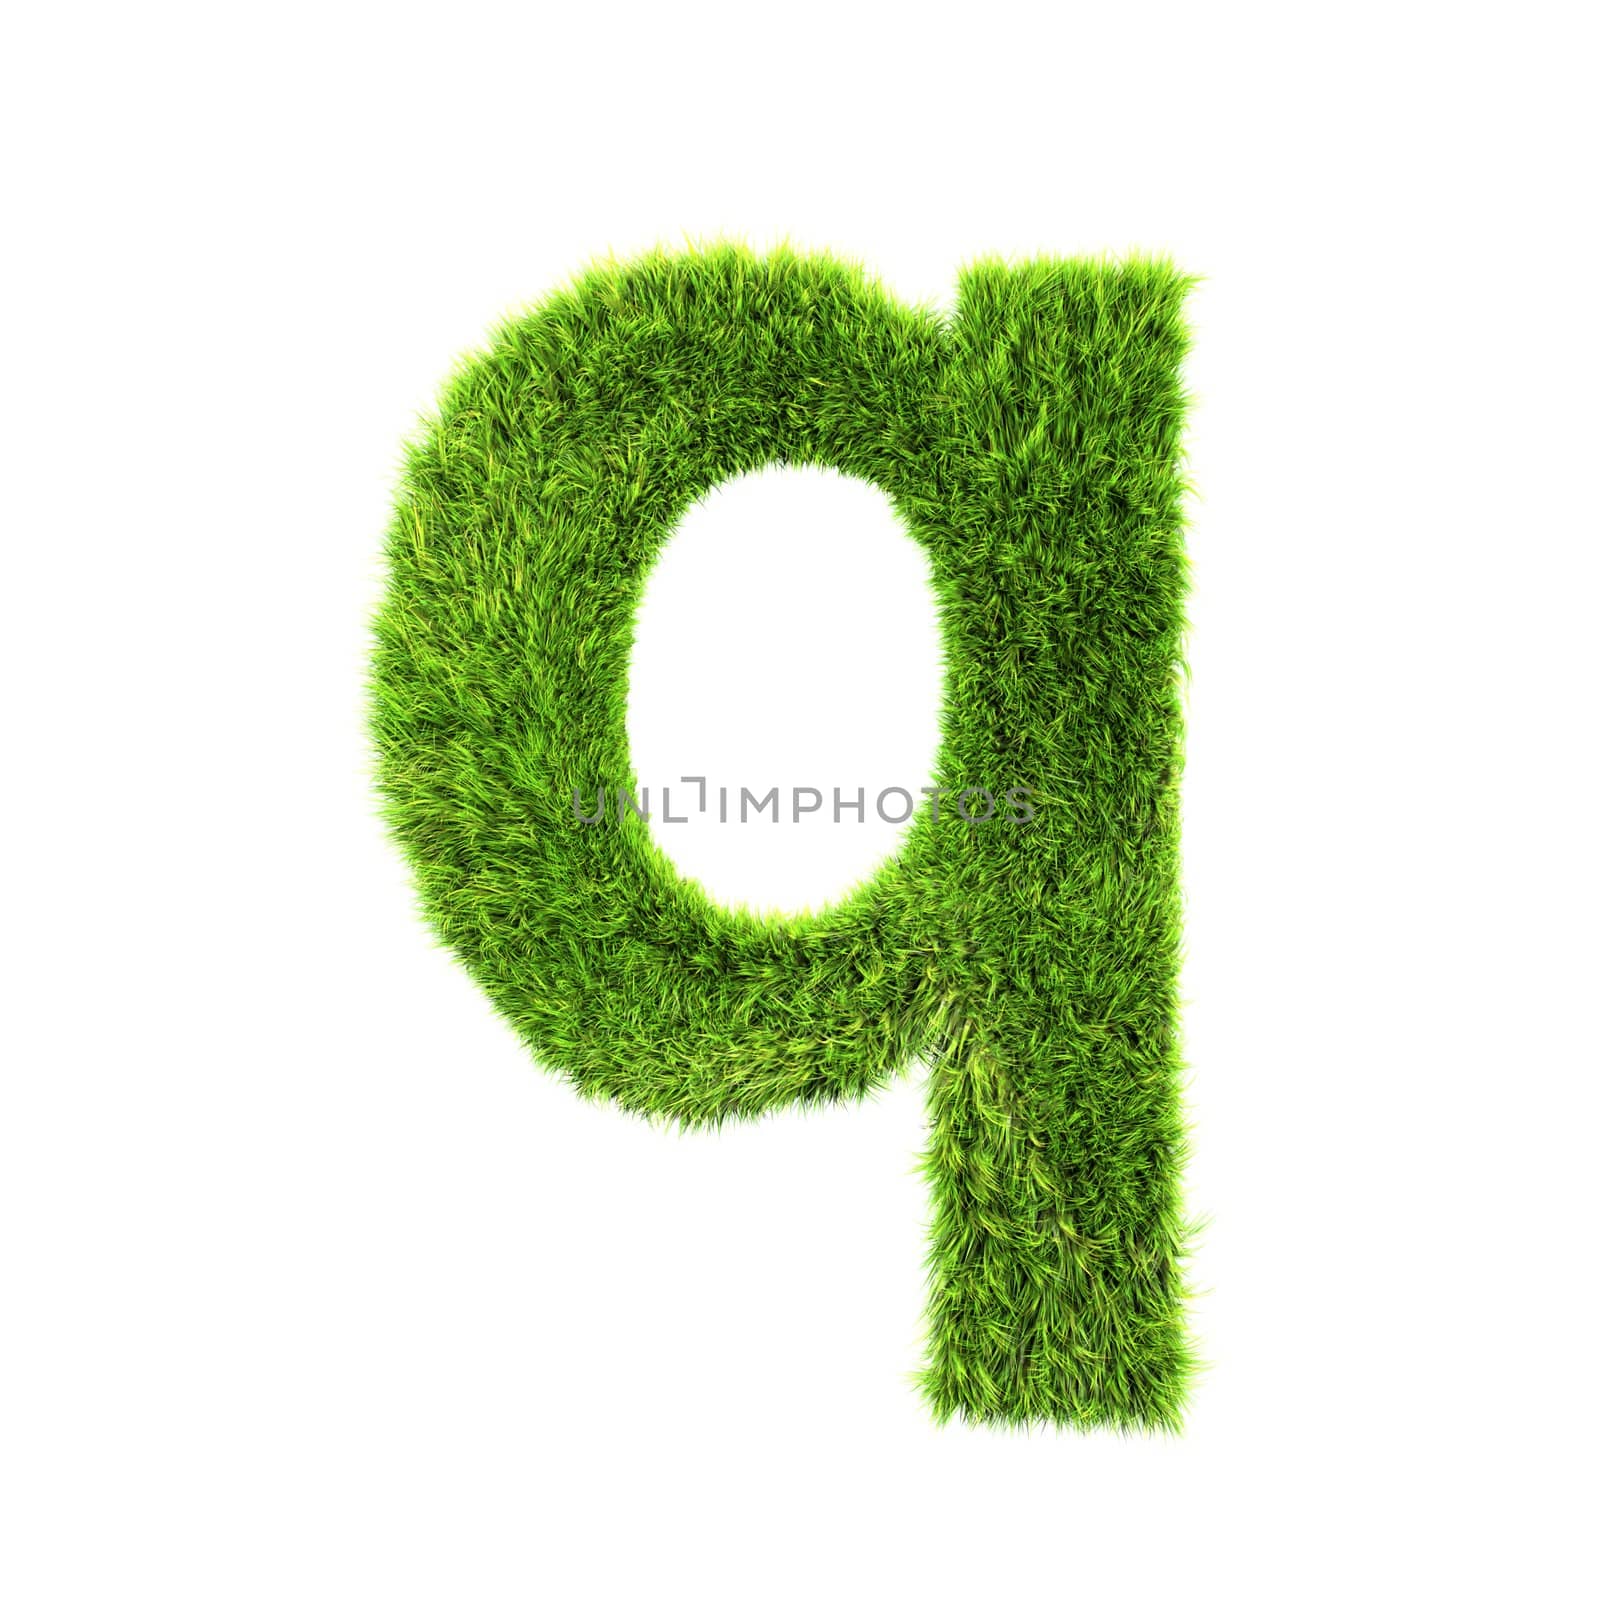 3d grass letter isolated on white background - q by chrisroll